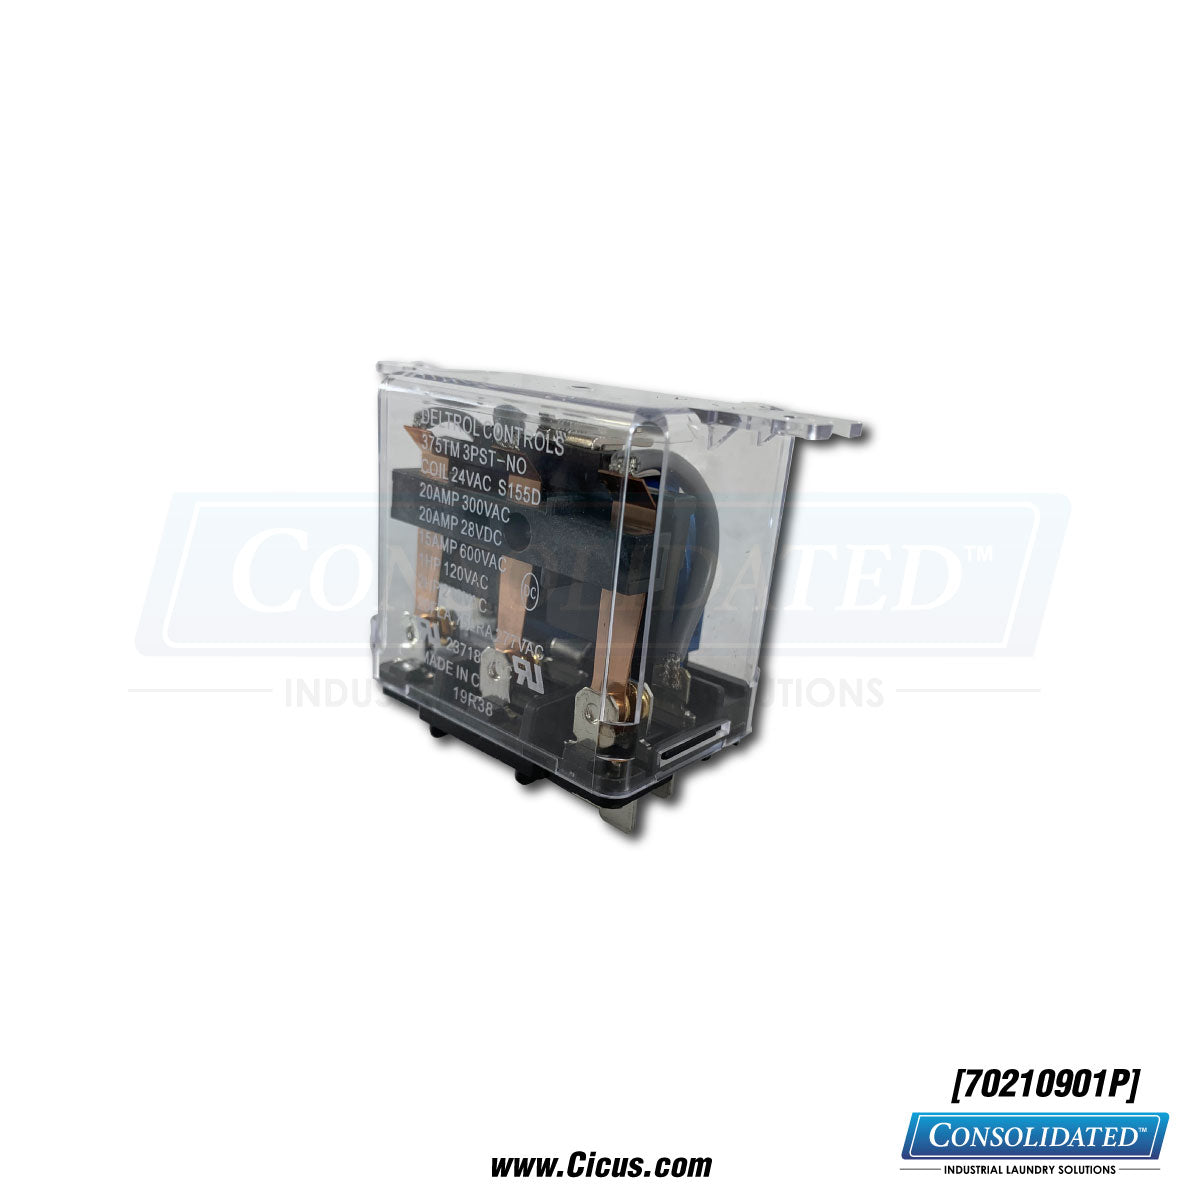 Alliance Laundry Systems Relay - 70210901P - Front View